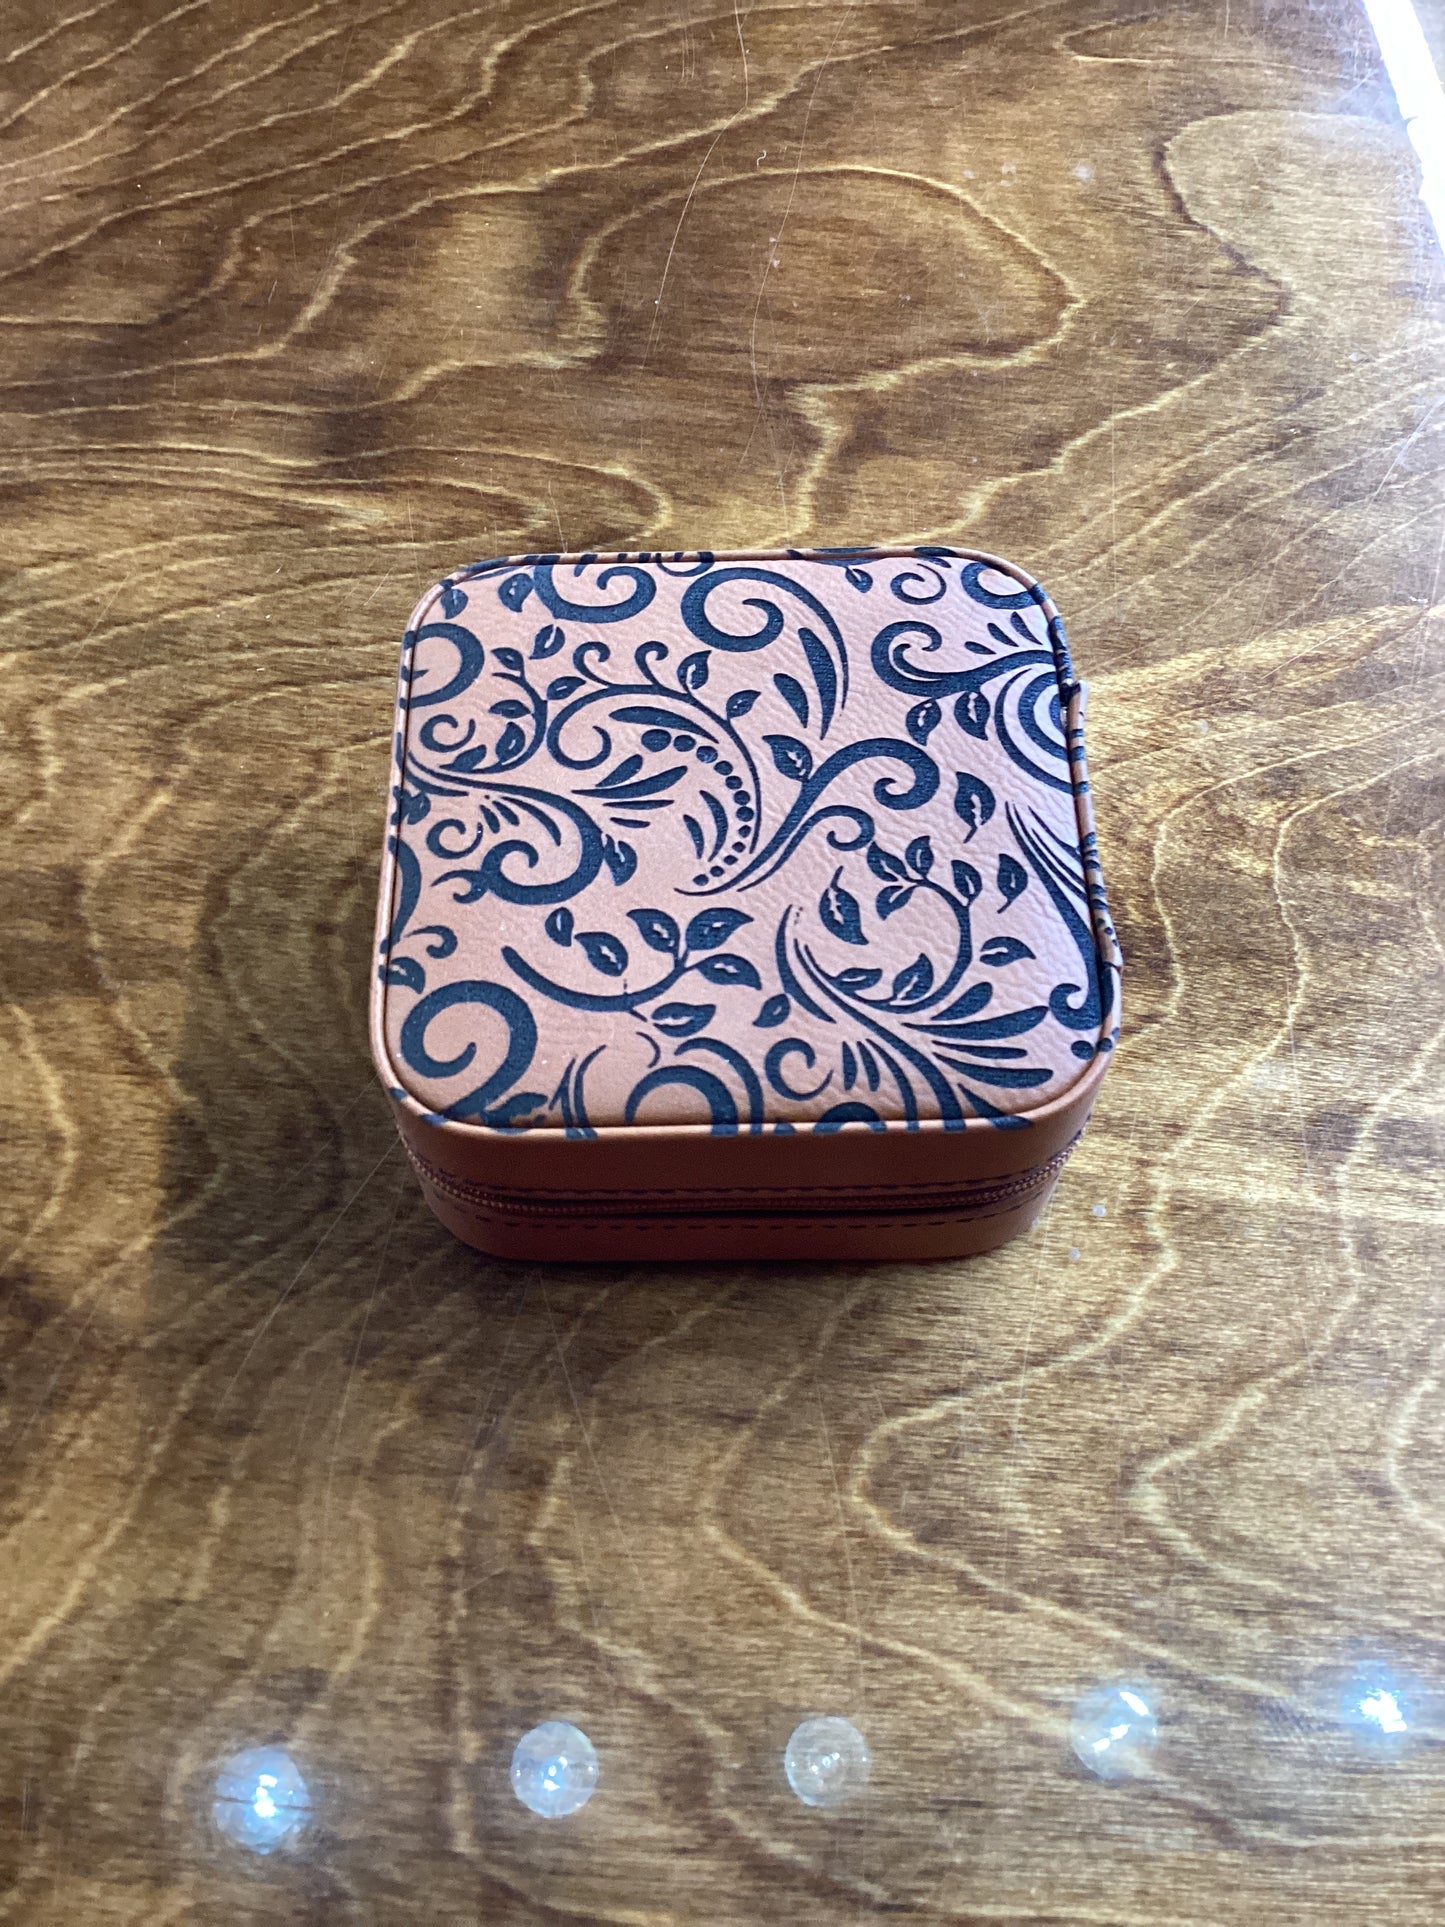 Tooled Leather Jewelry Boxes